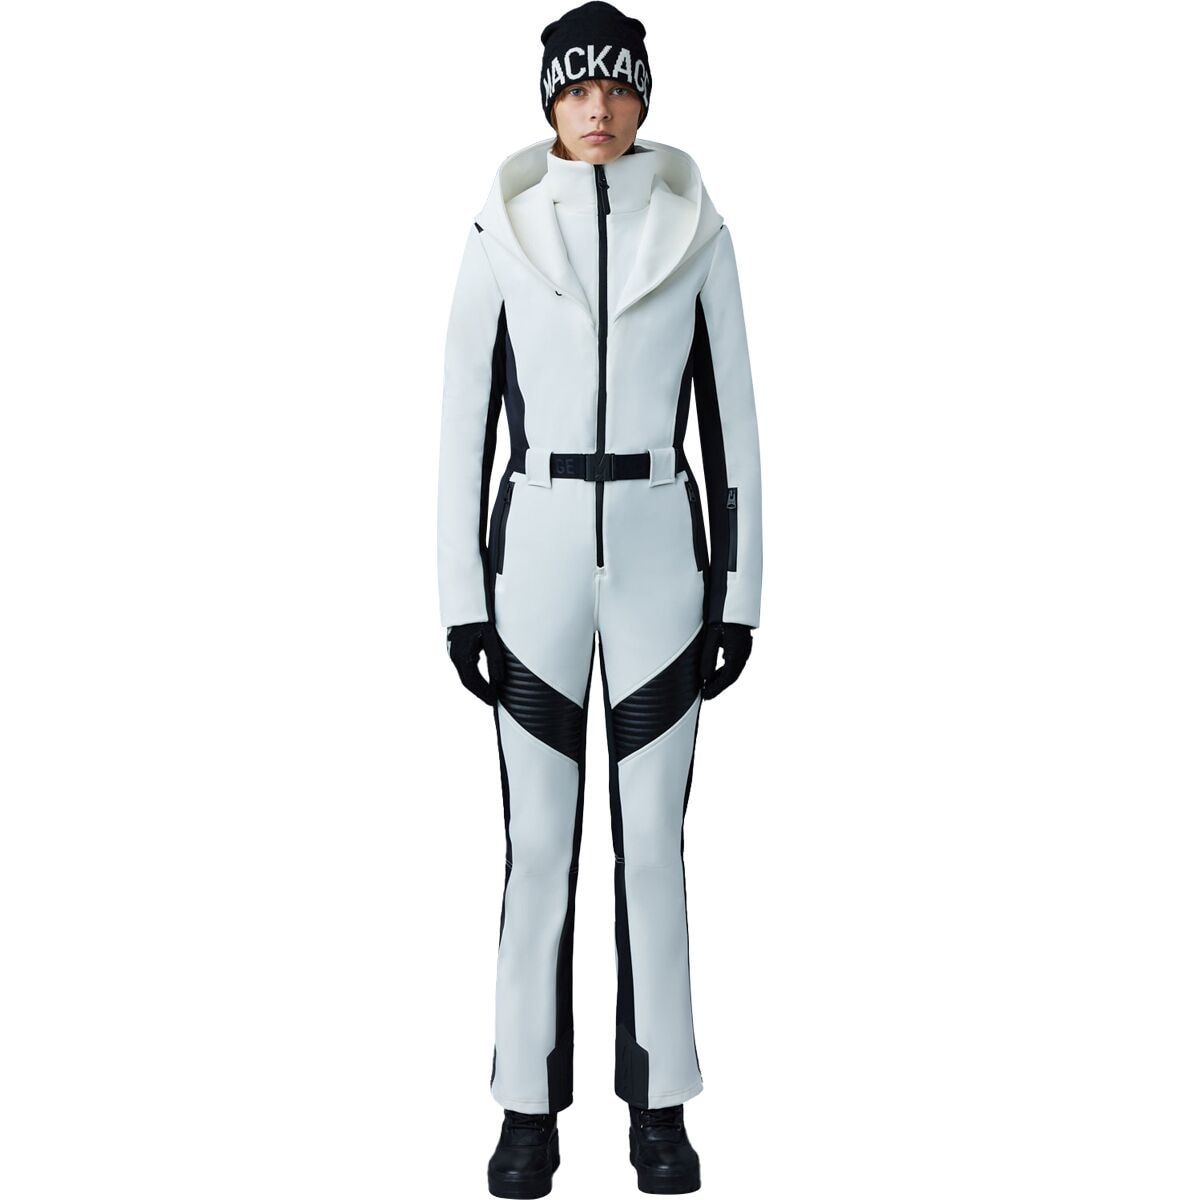 Mackage Elle Snow Suit - Women's - Clothing | Backcountry